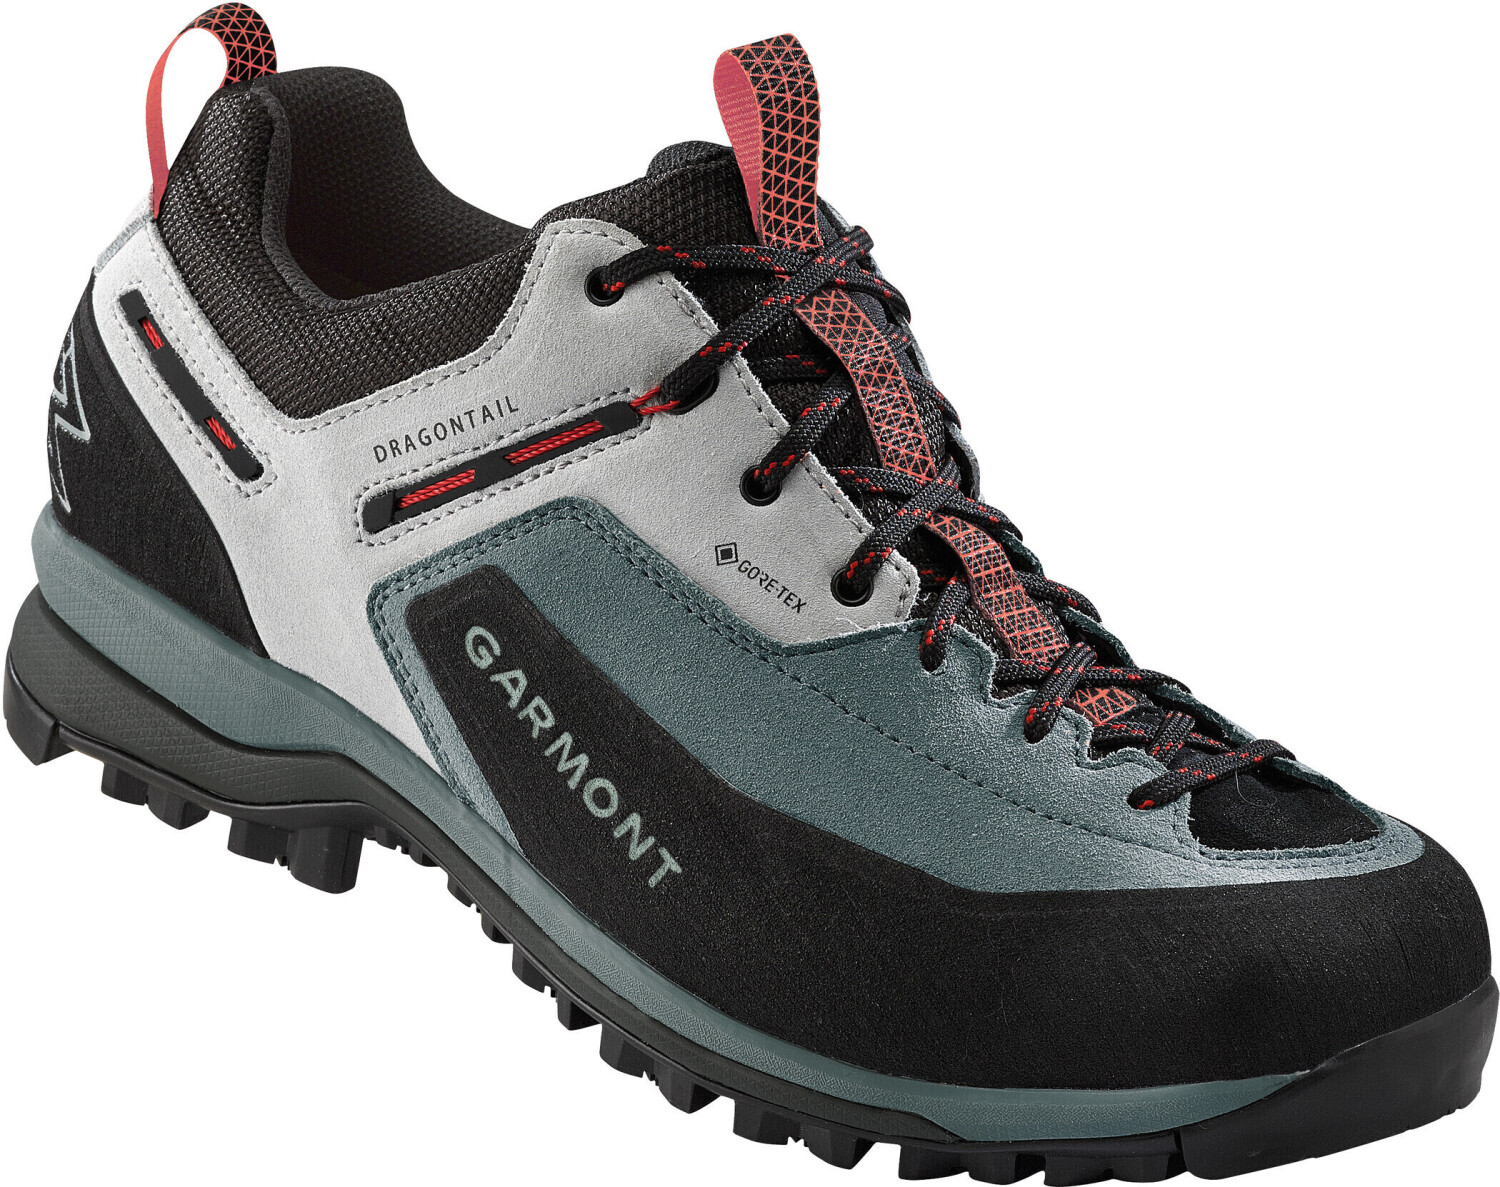 Buy Garmont Dragontail Tech GTX grey/red from £103.99 (Today) – Best ...